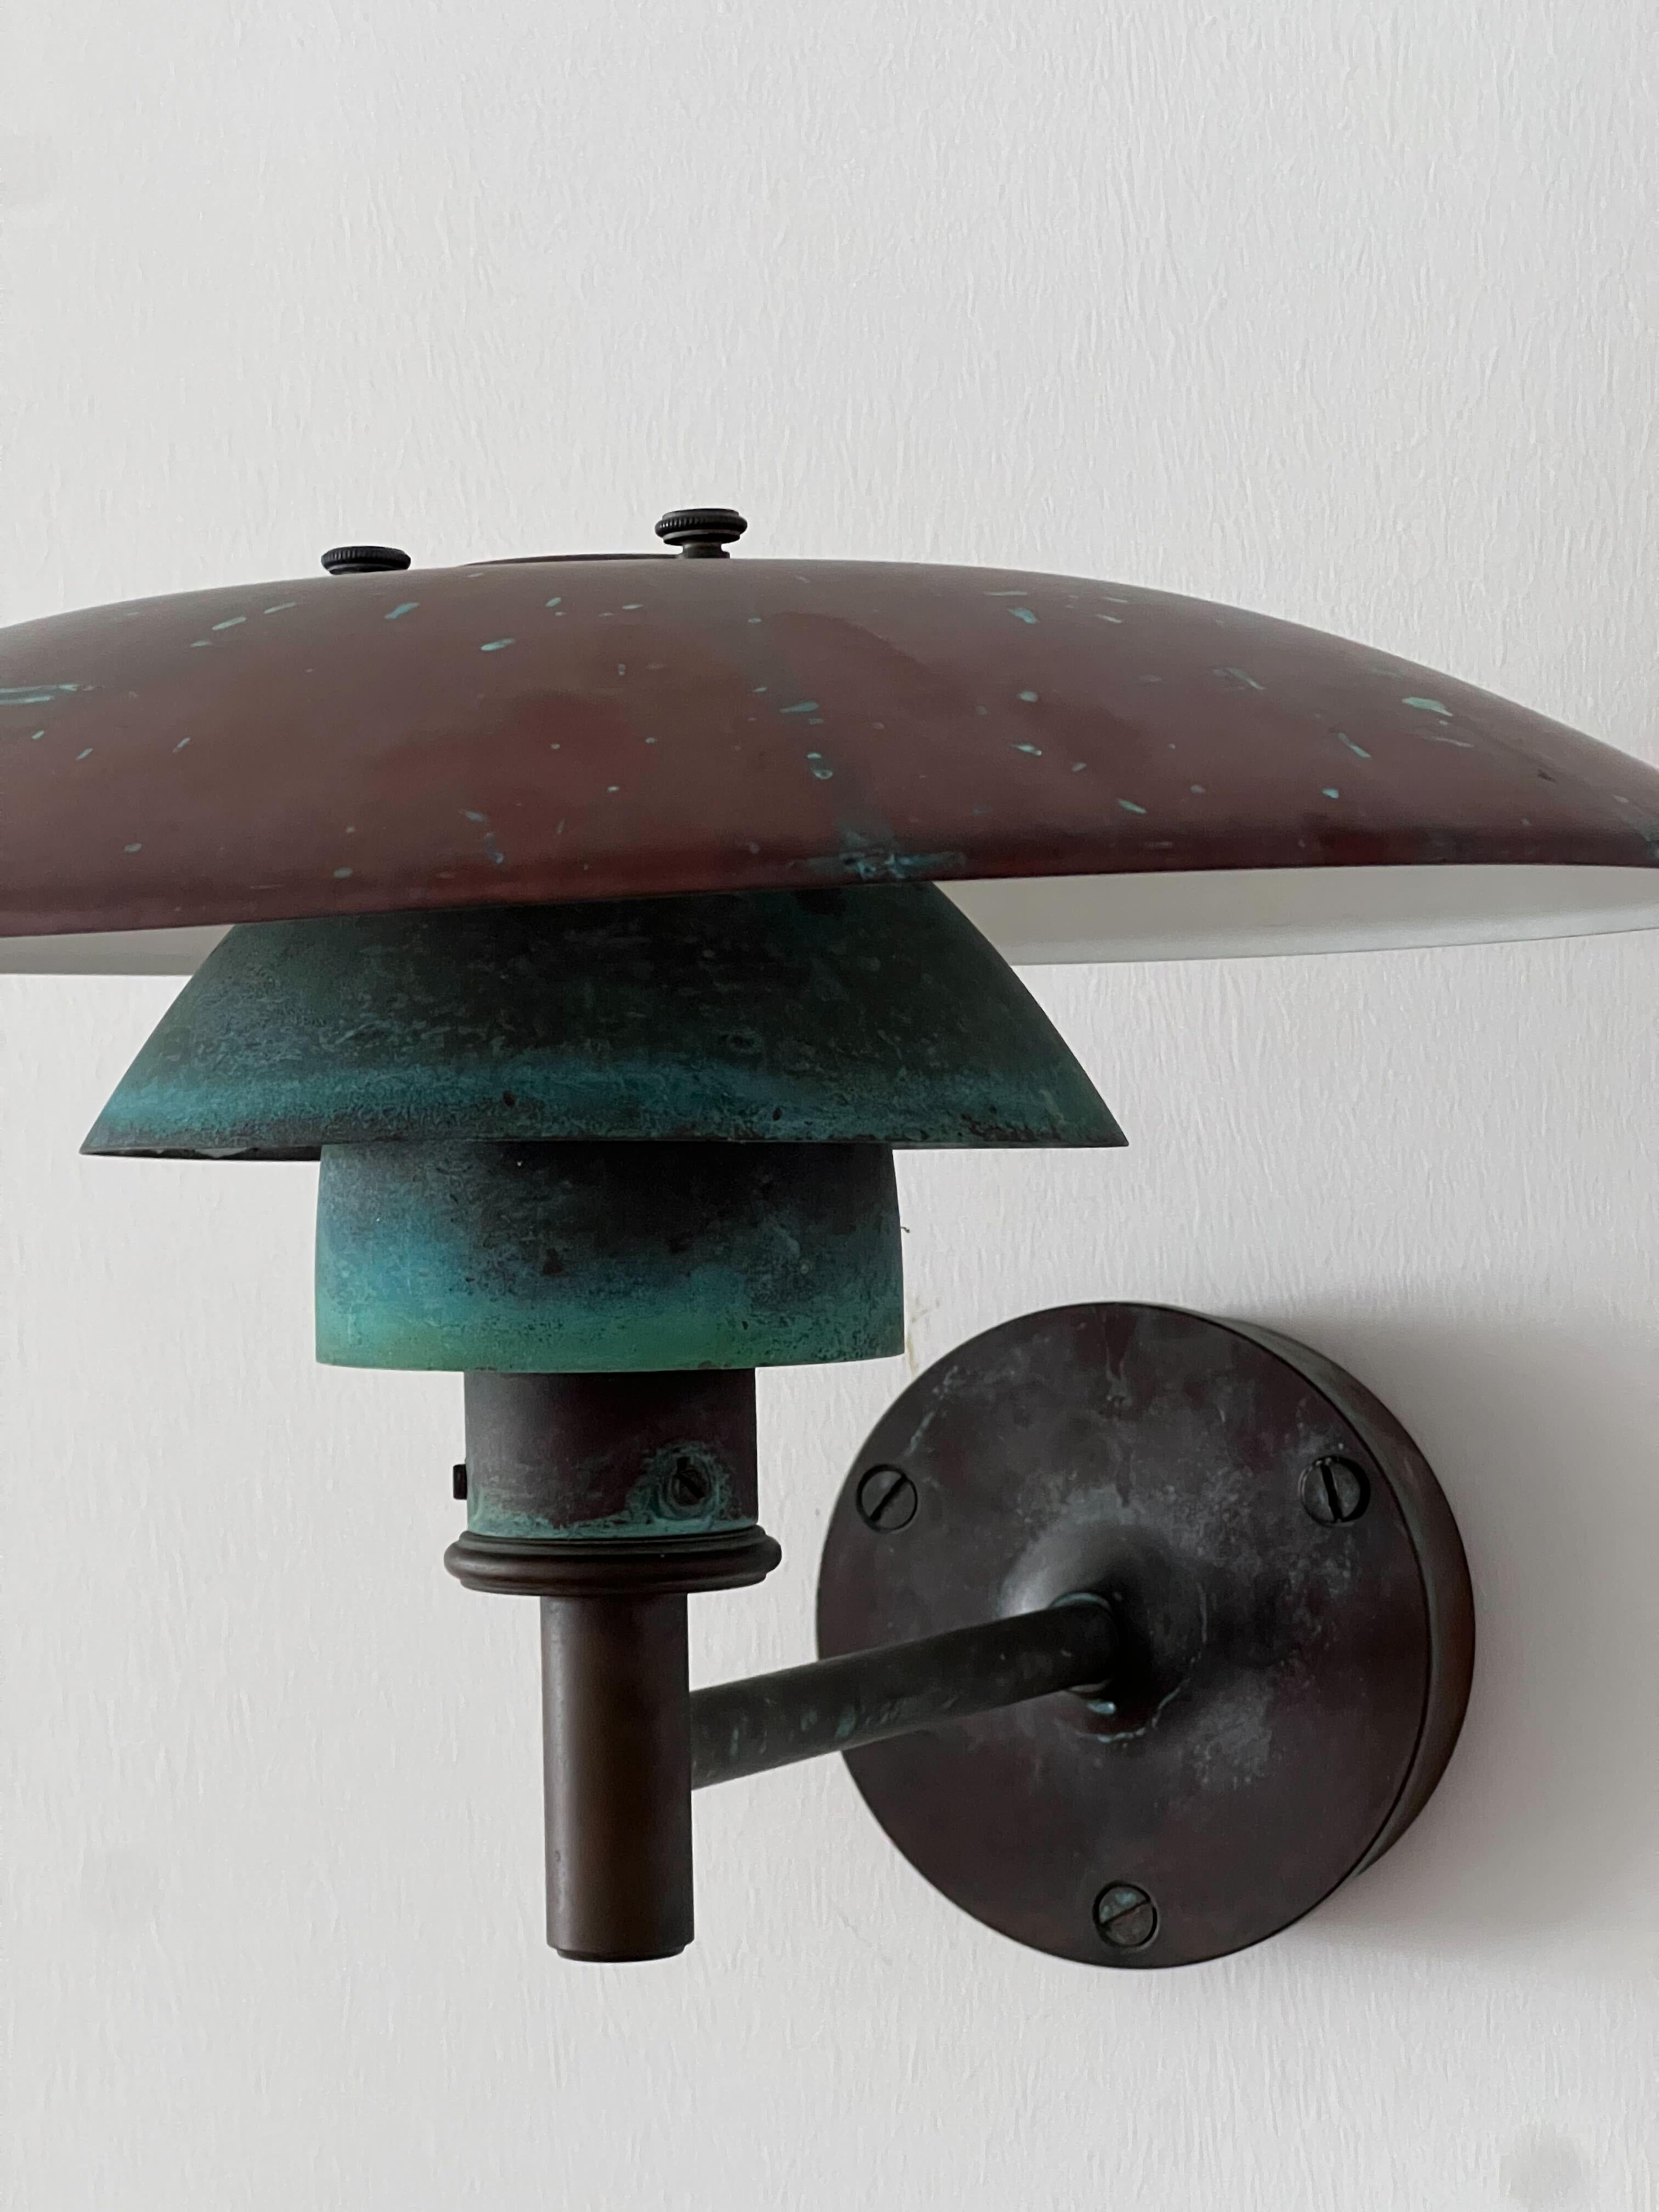 Mid-20th Century Poul Henningsen, Wall Lights, Patinated Copper, Louis Poulsen, Denmark, 1950s